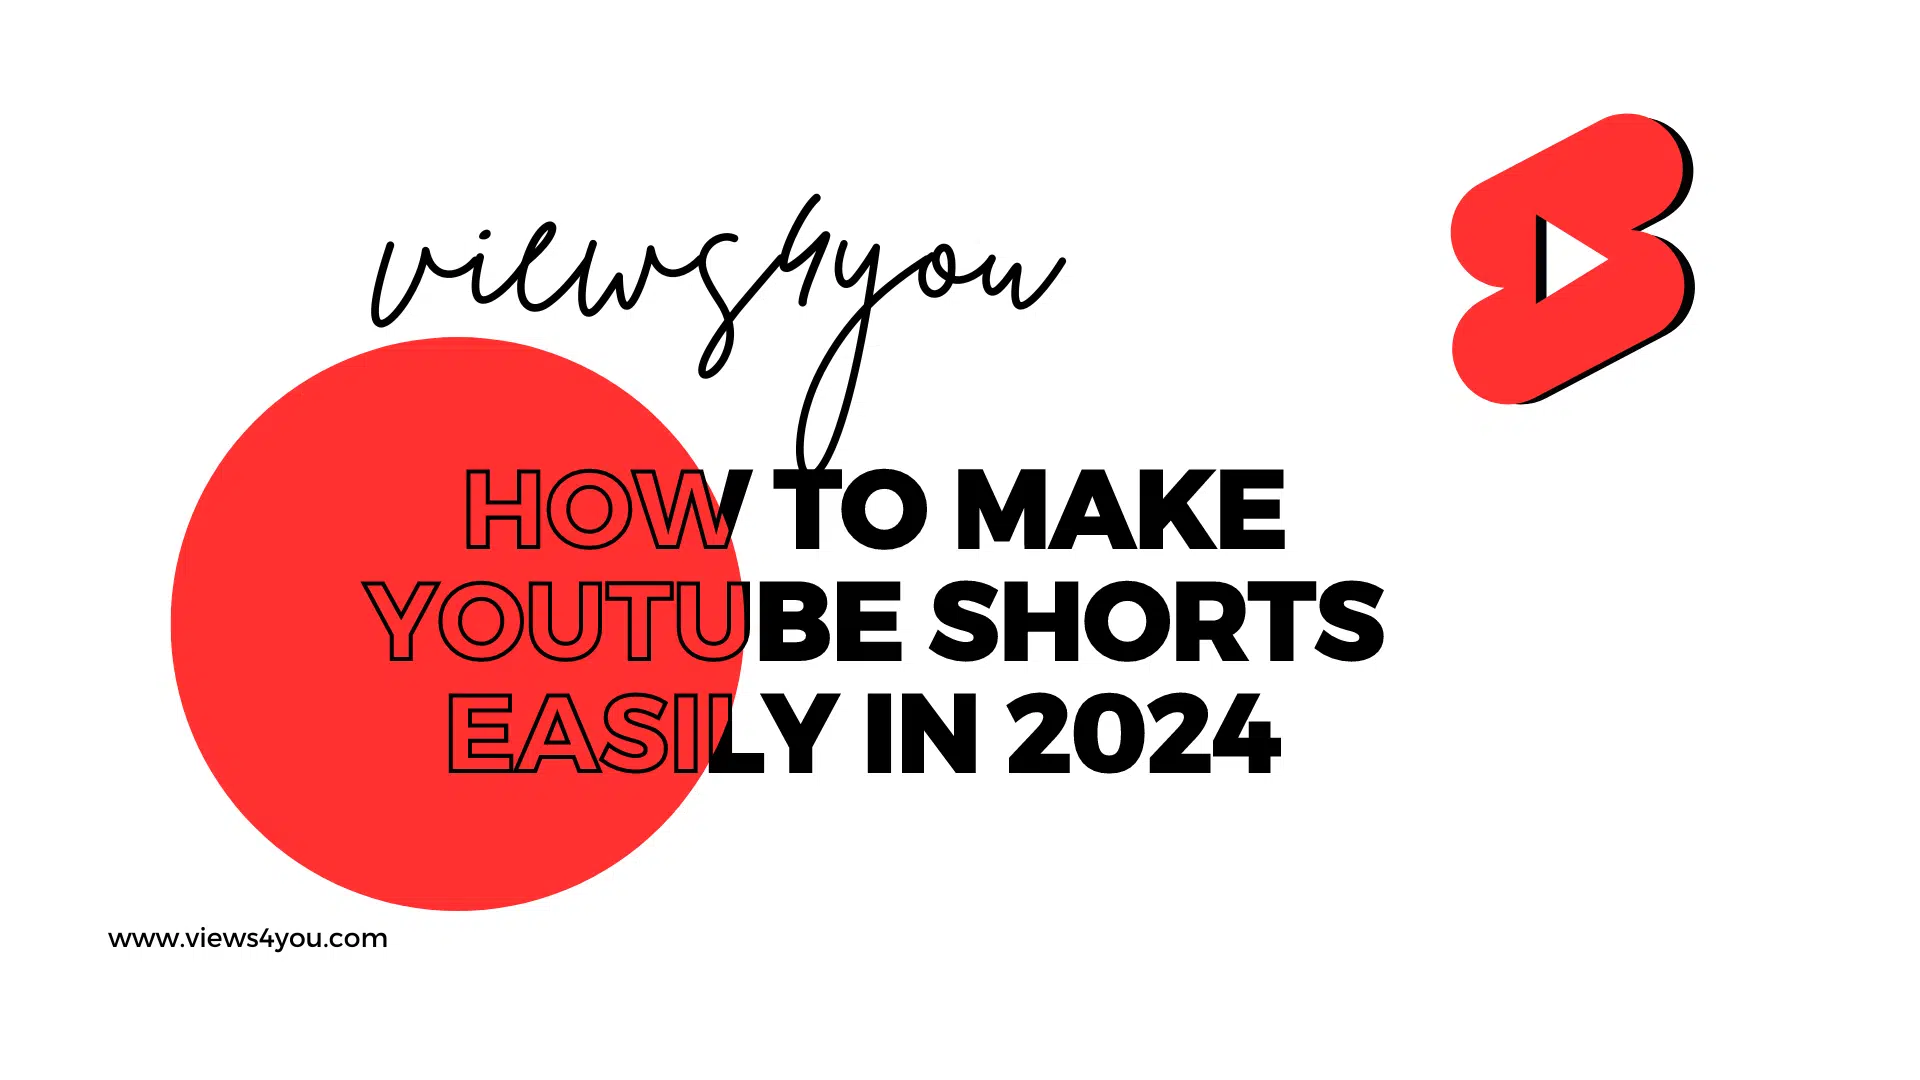 Learn how to make YouTube shorts easily.